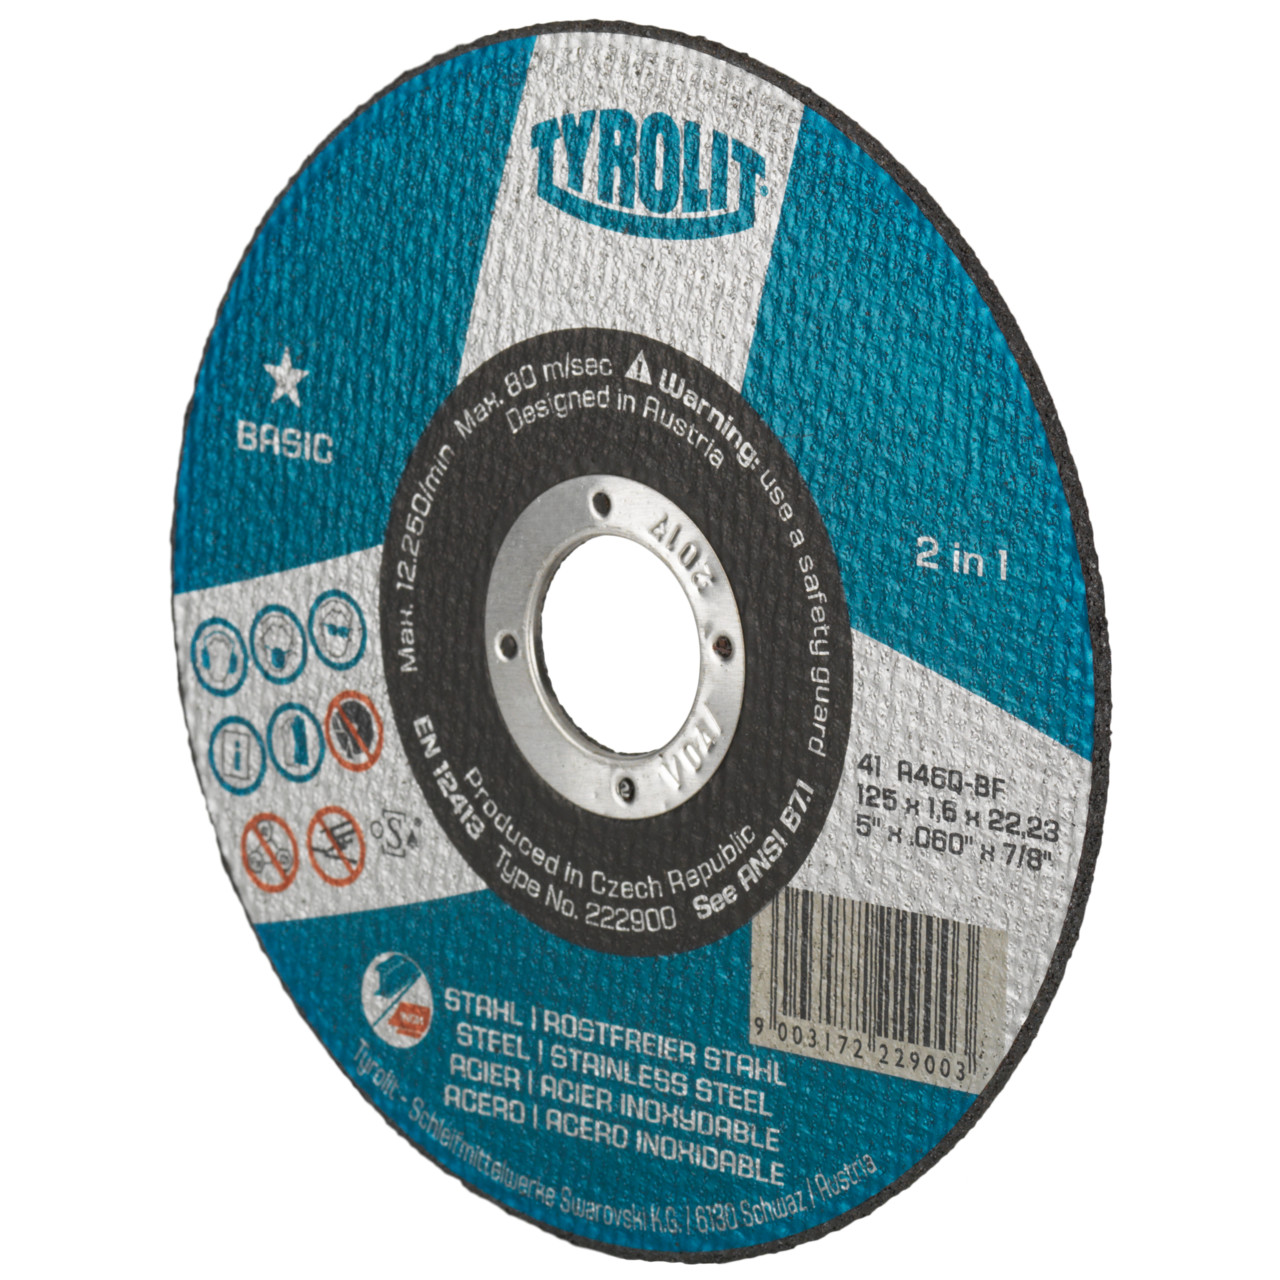 Tyrolit Cutting discs DxDxH 125x1.0x22.23 2in1 for steel and stainless steel, shape: 41 - straight version, Art. 34332871